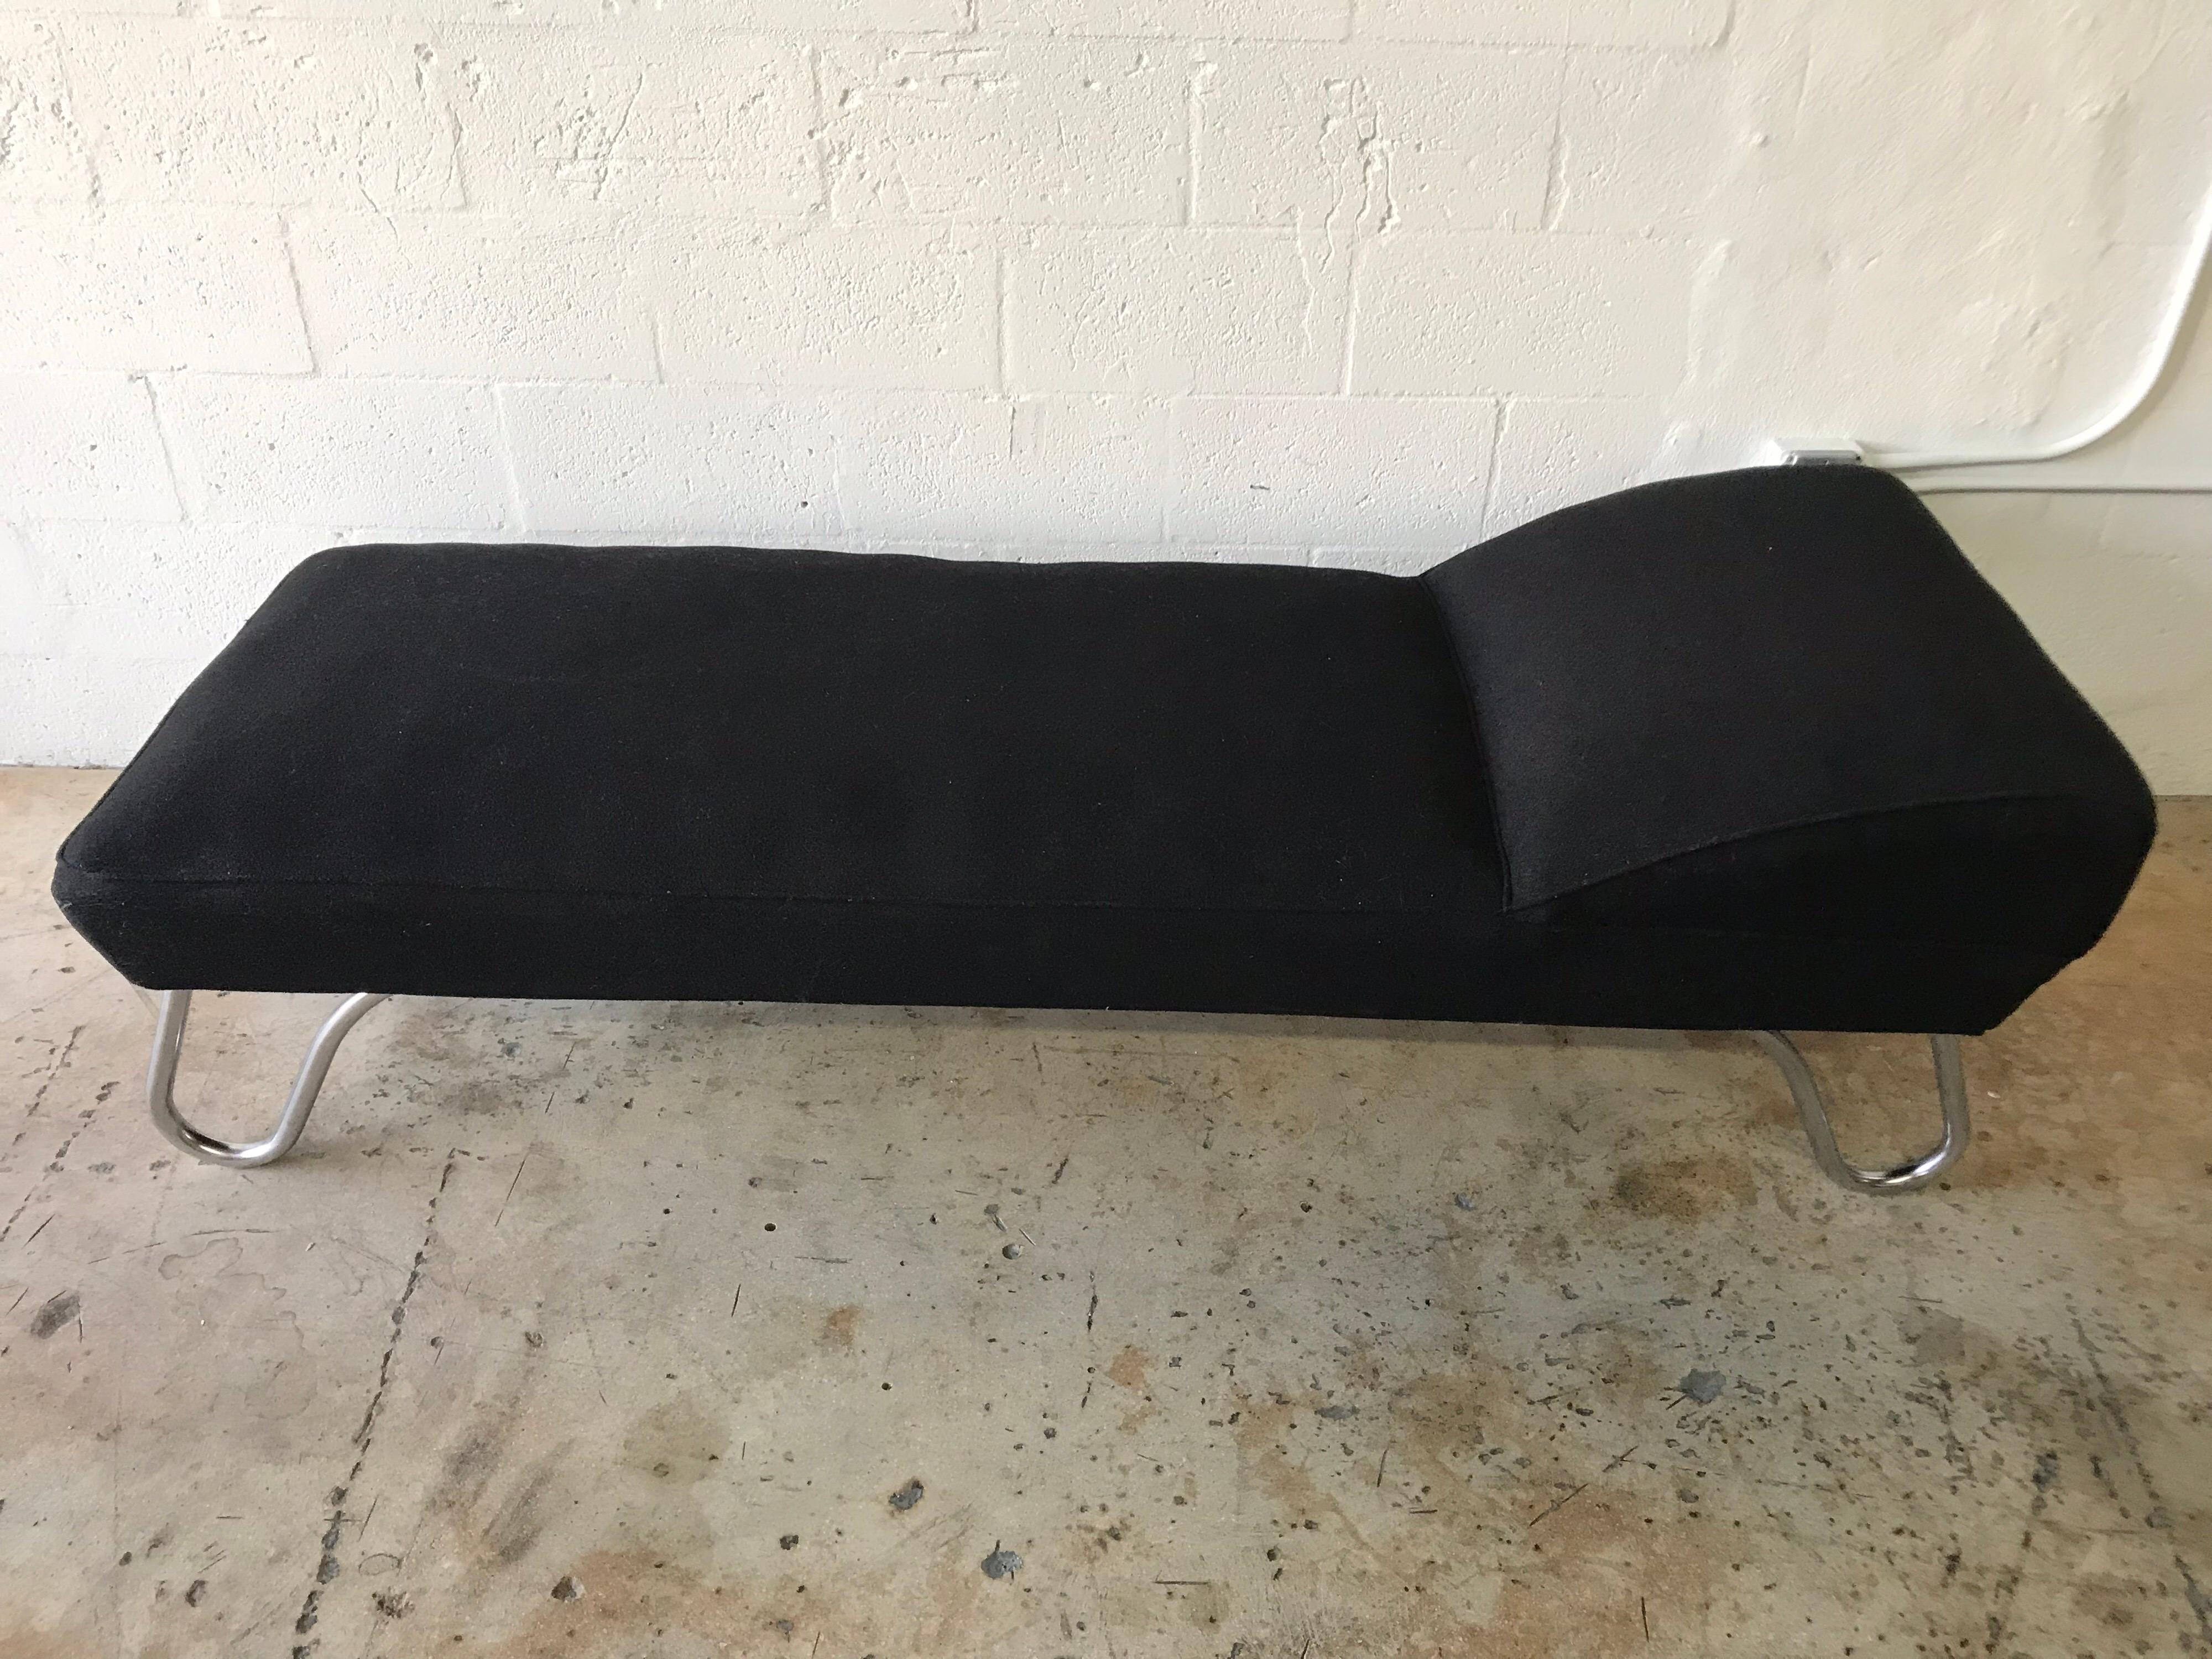 Iconic Art Deco streamline modern chaise lounge or daybed rendered in black wool upholstery with chrome legs and frame by KEM Weber, USA, 1930s